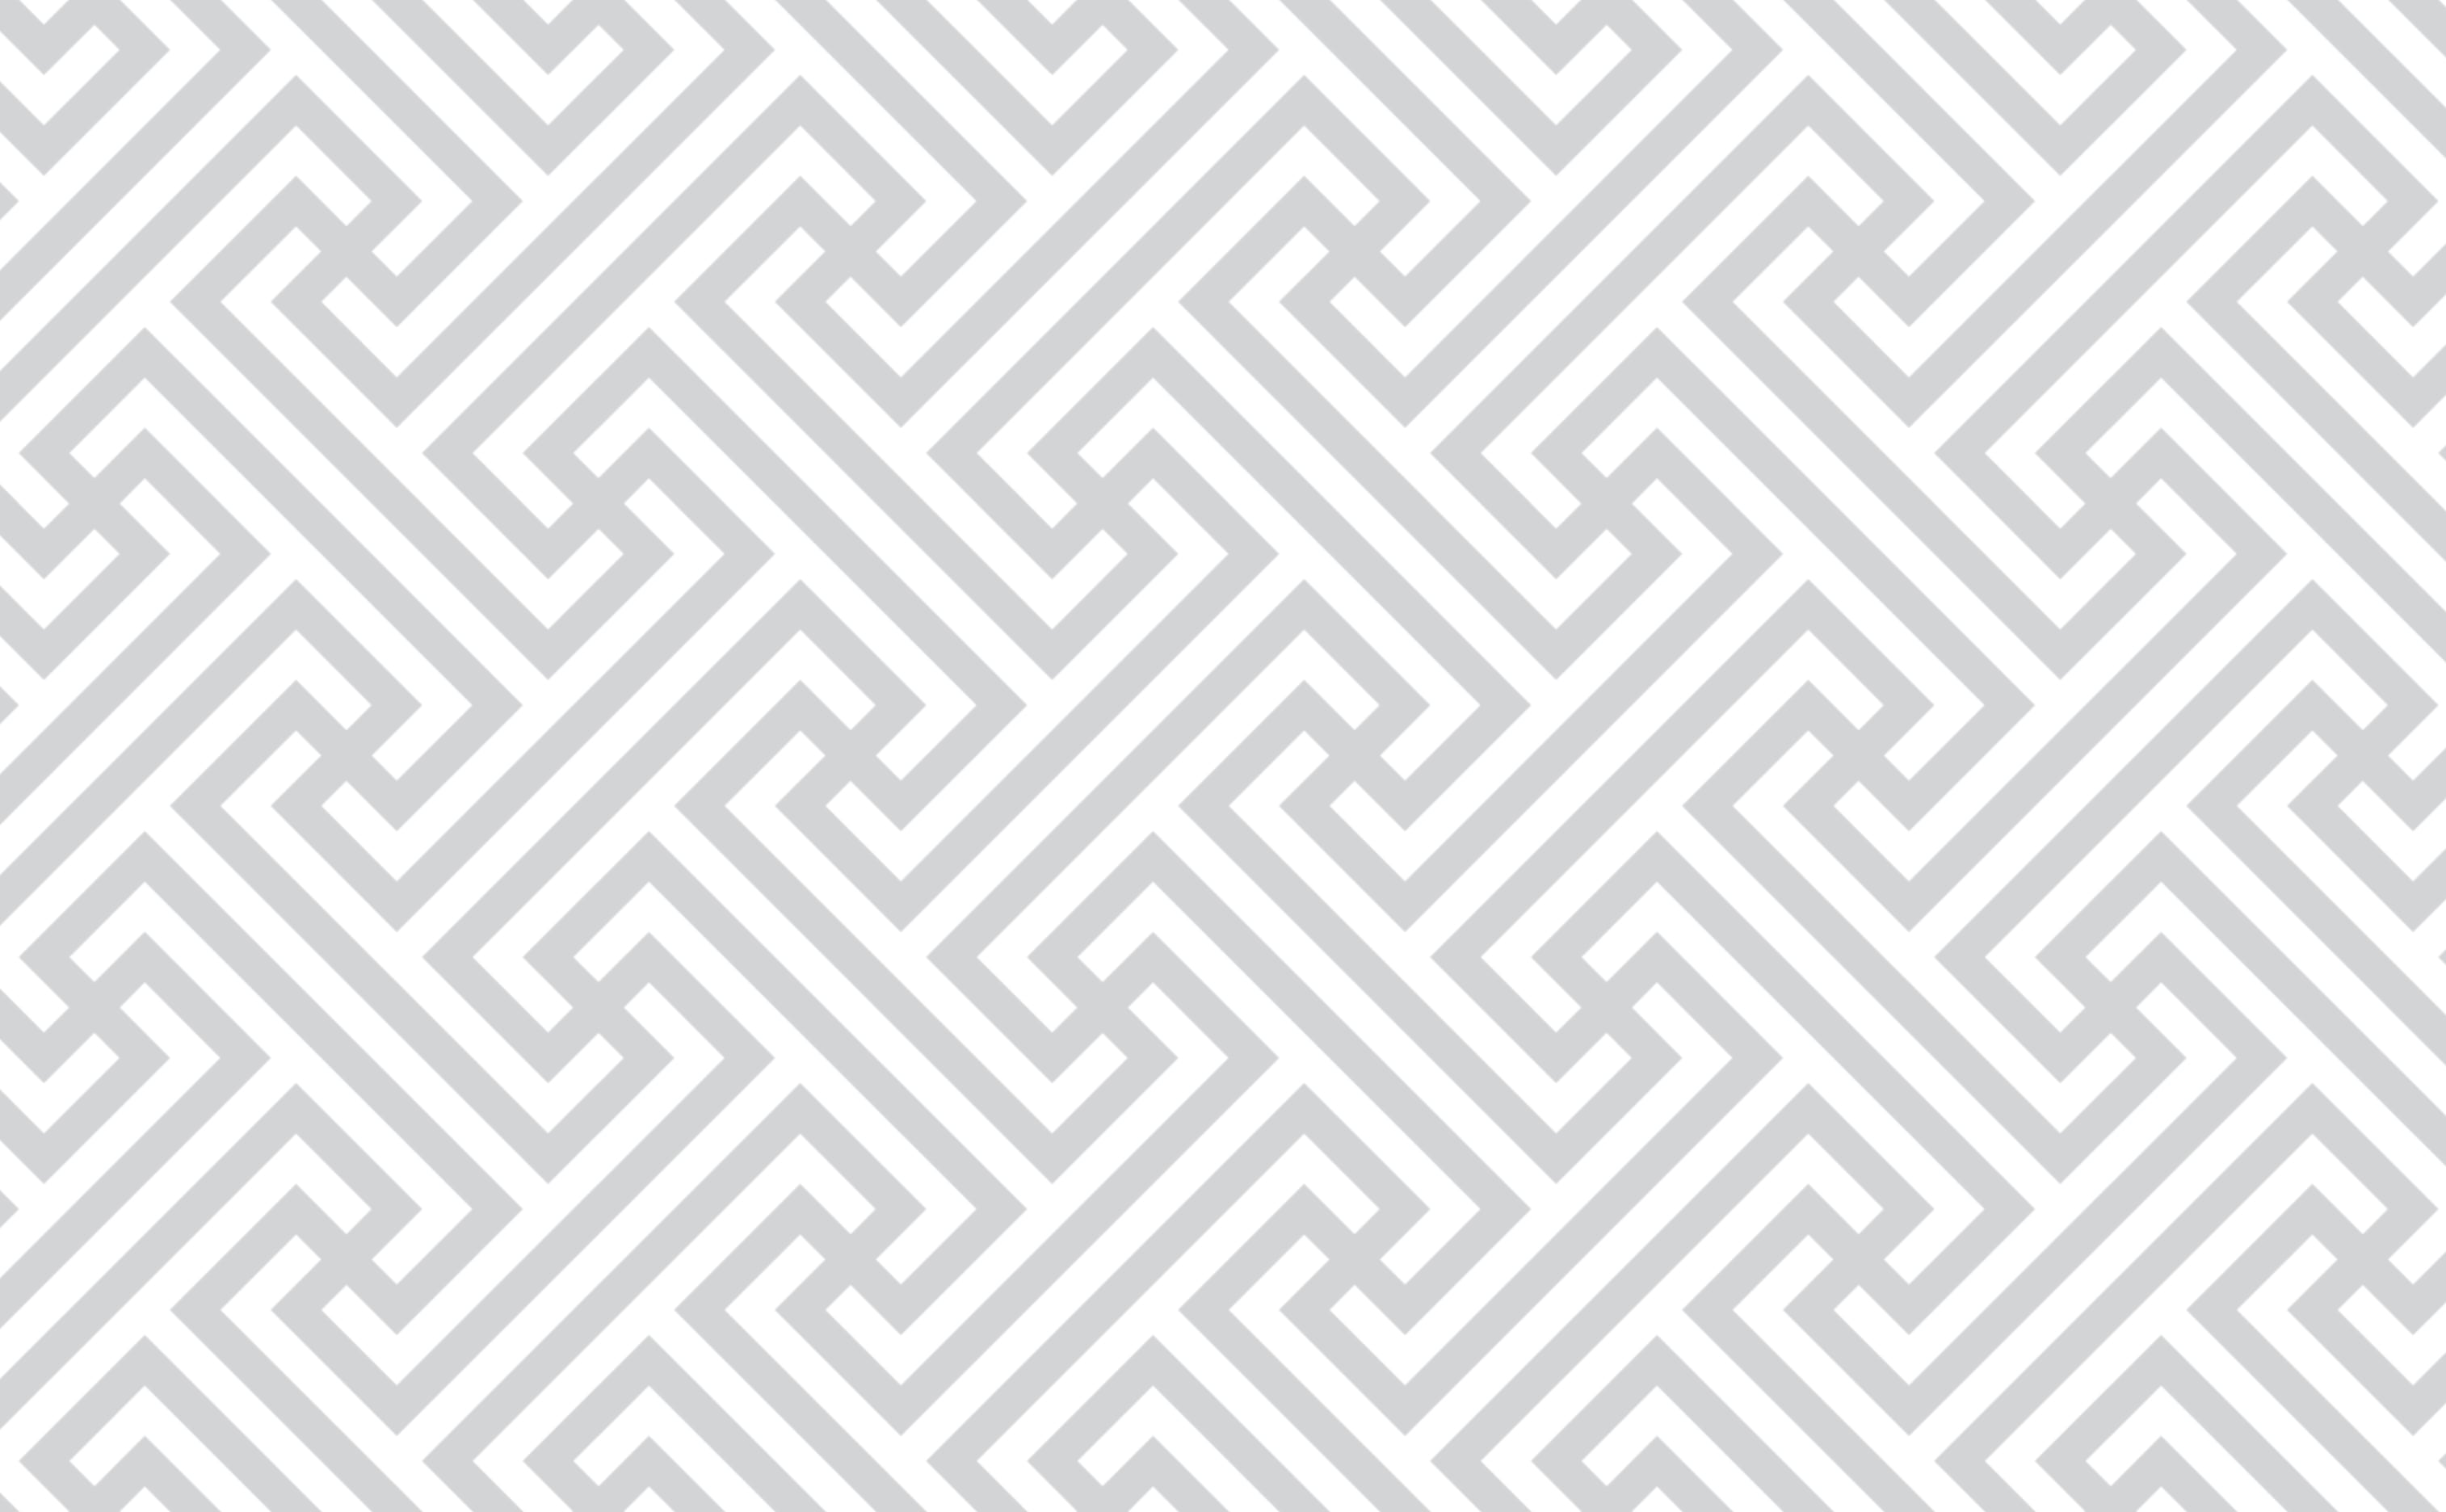 Impossible Labyrinth